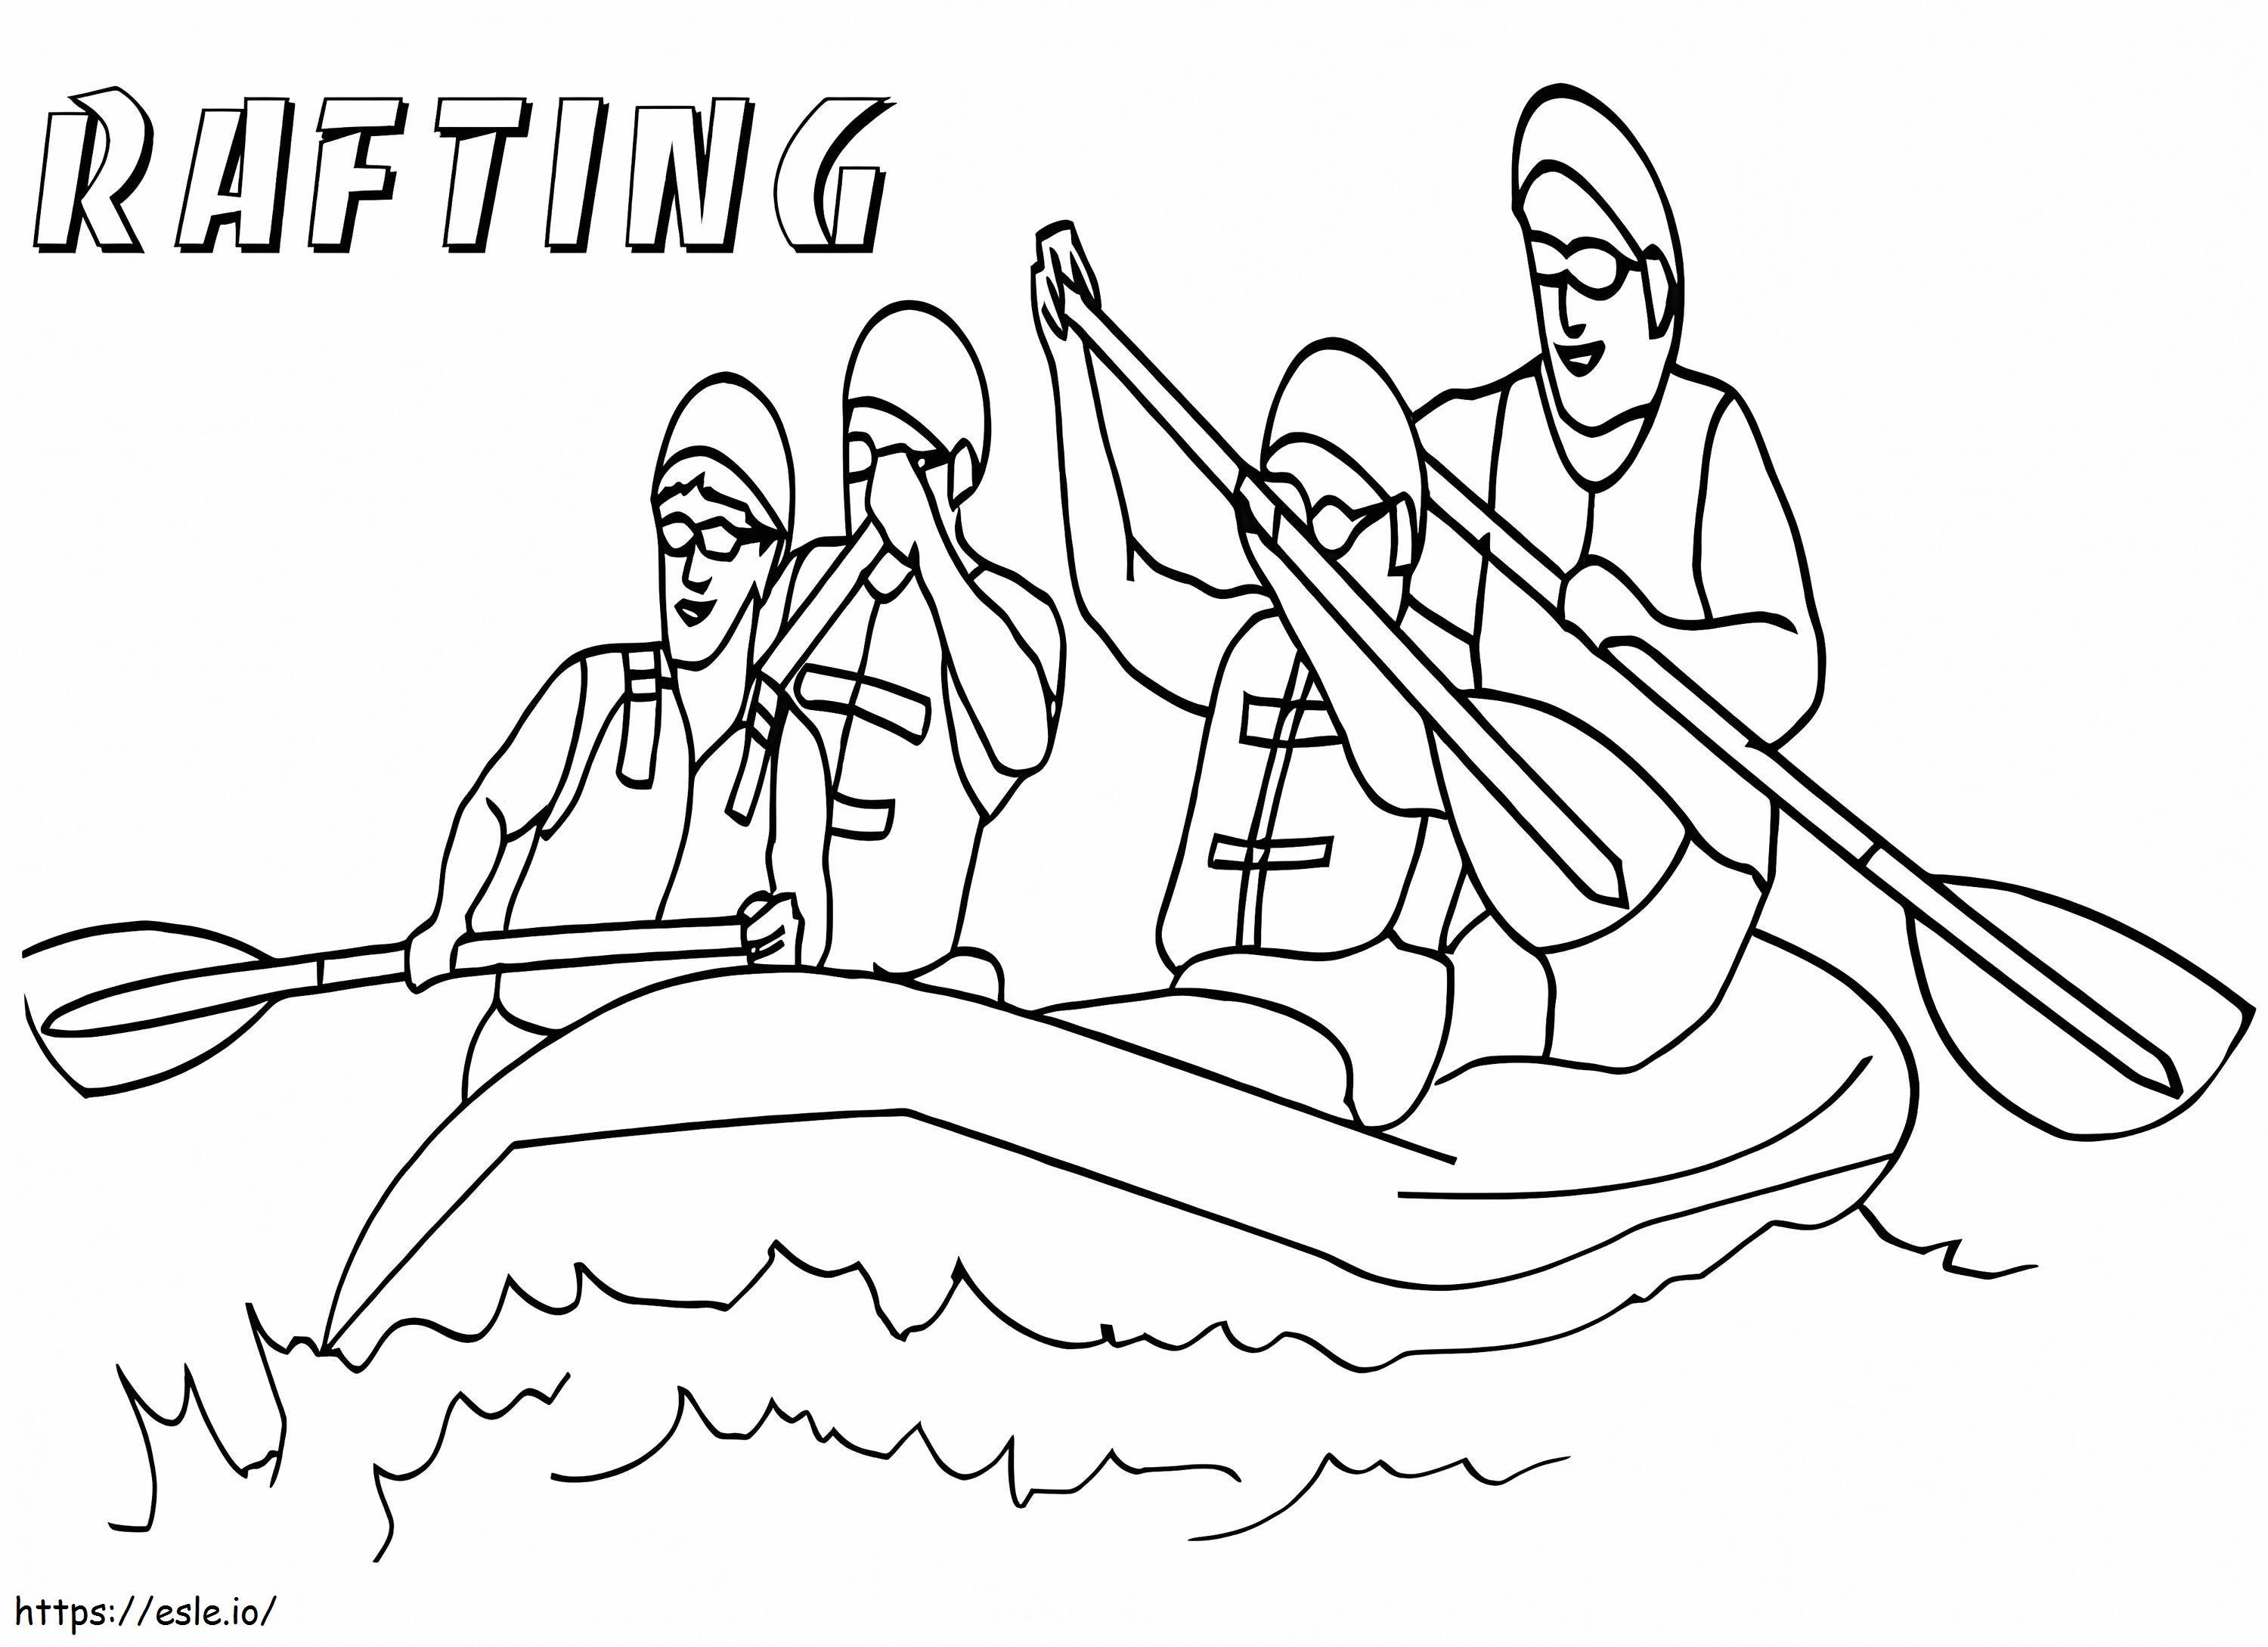 Rafting coloring page